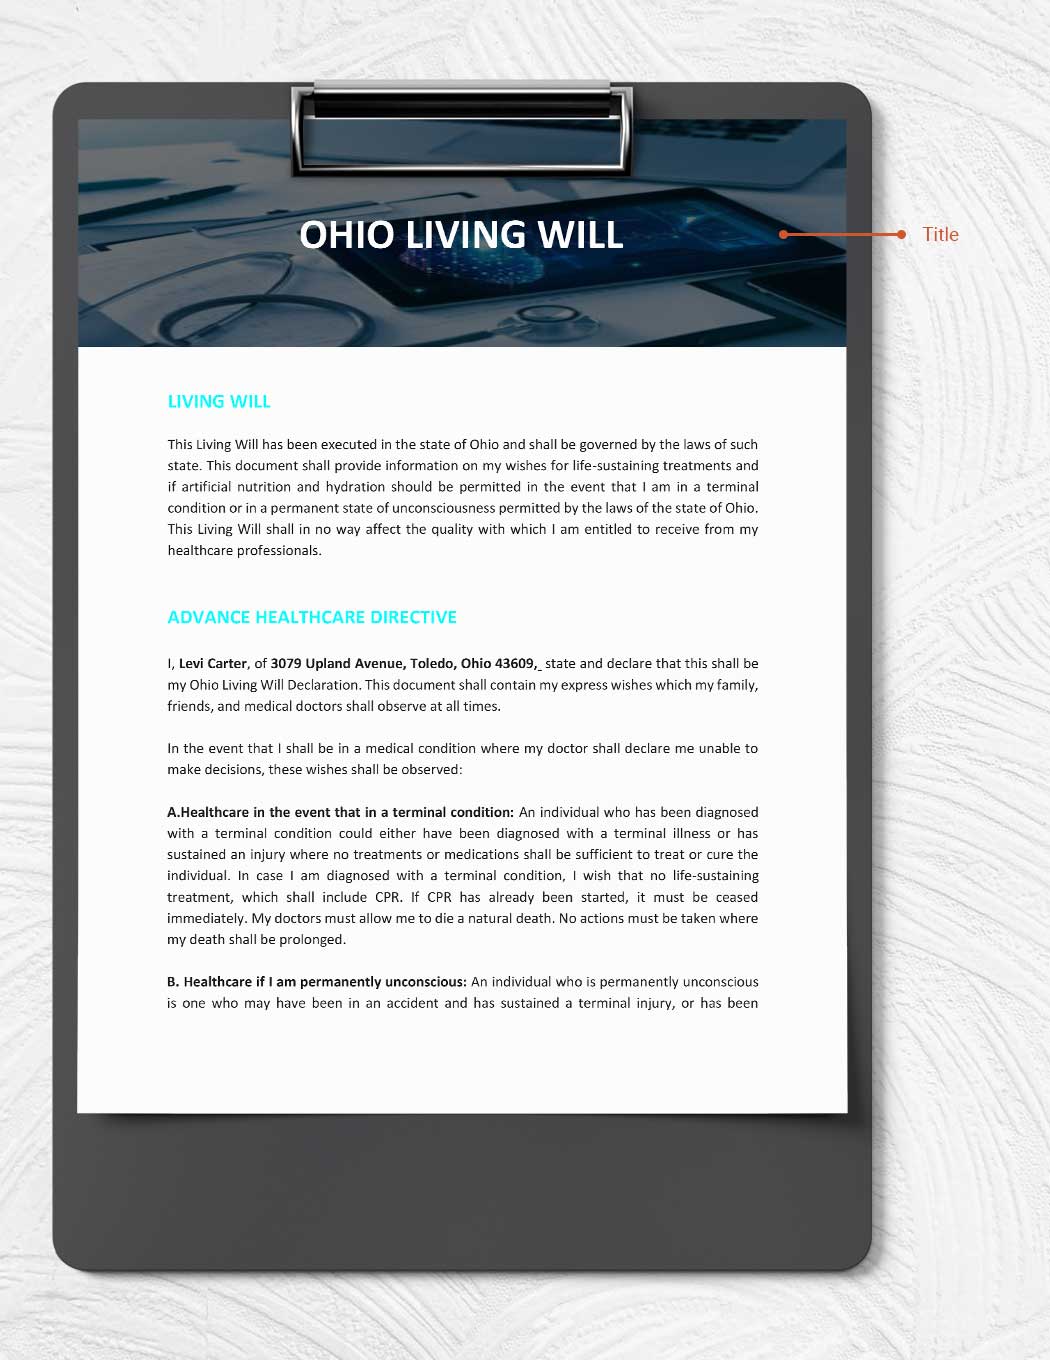 Ohio Living Will Template Download in Word, Google Docs